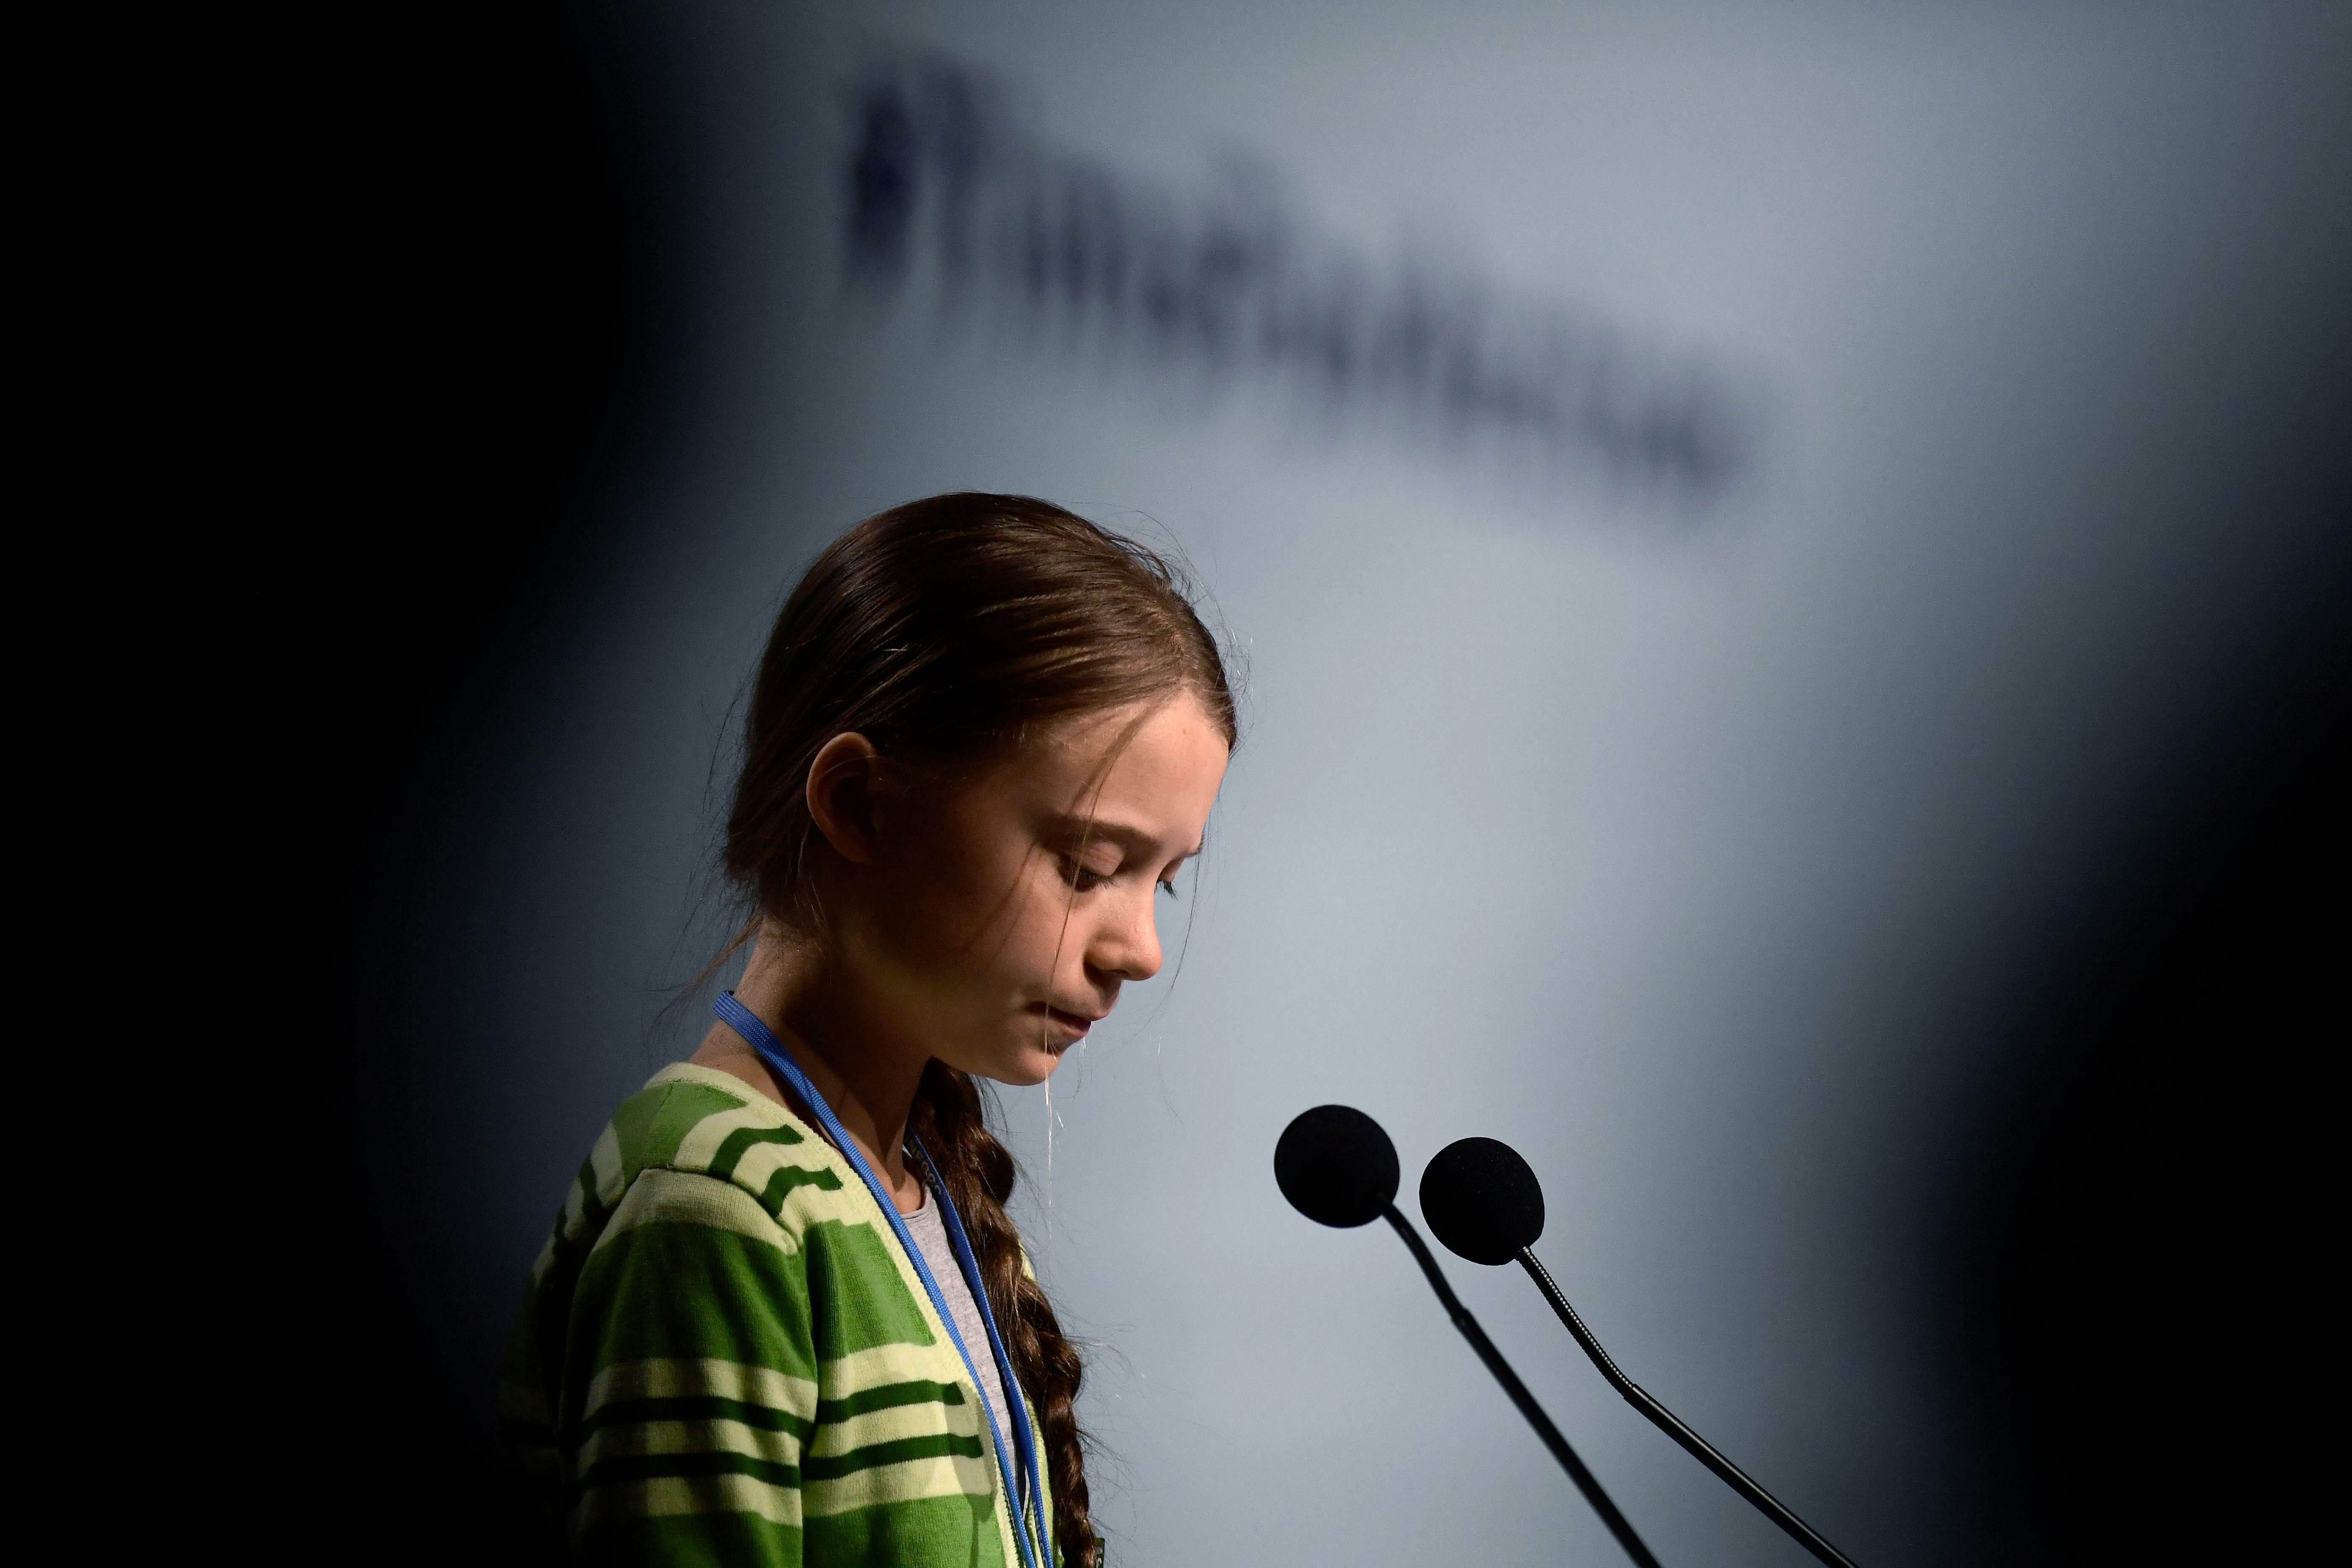 Swedish climate activist Greta Thunberg gives a speech during a high-level event on climate emergency hosted by the Chilean presidency during the UN Climate Change Conference COP25 at the 'IFEMA - Feria de Madrid' exhibition centre, in Madrid. (AFP Photo)